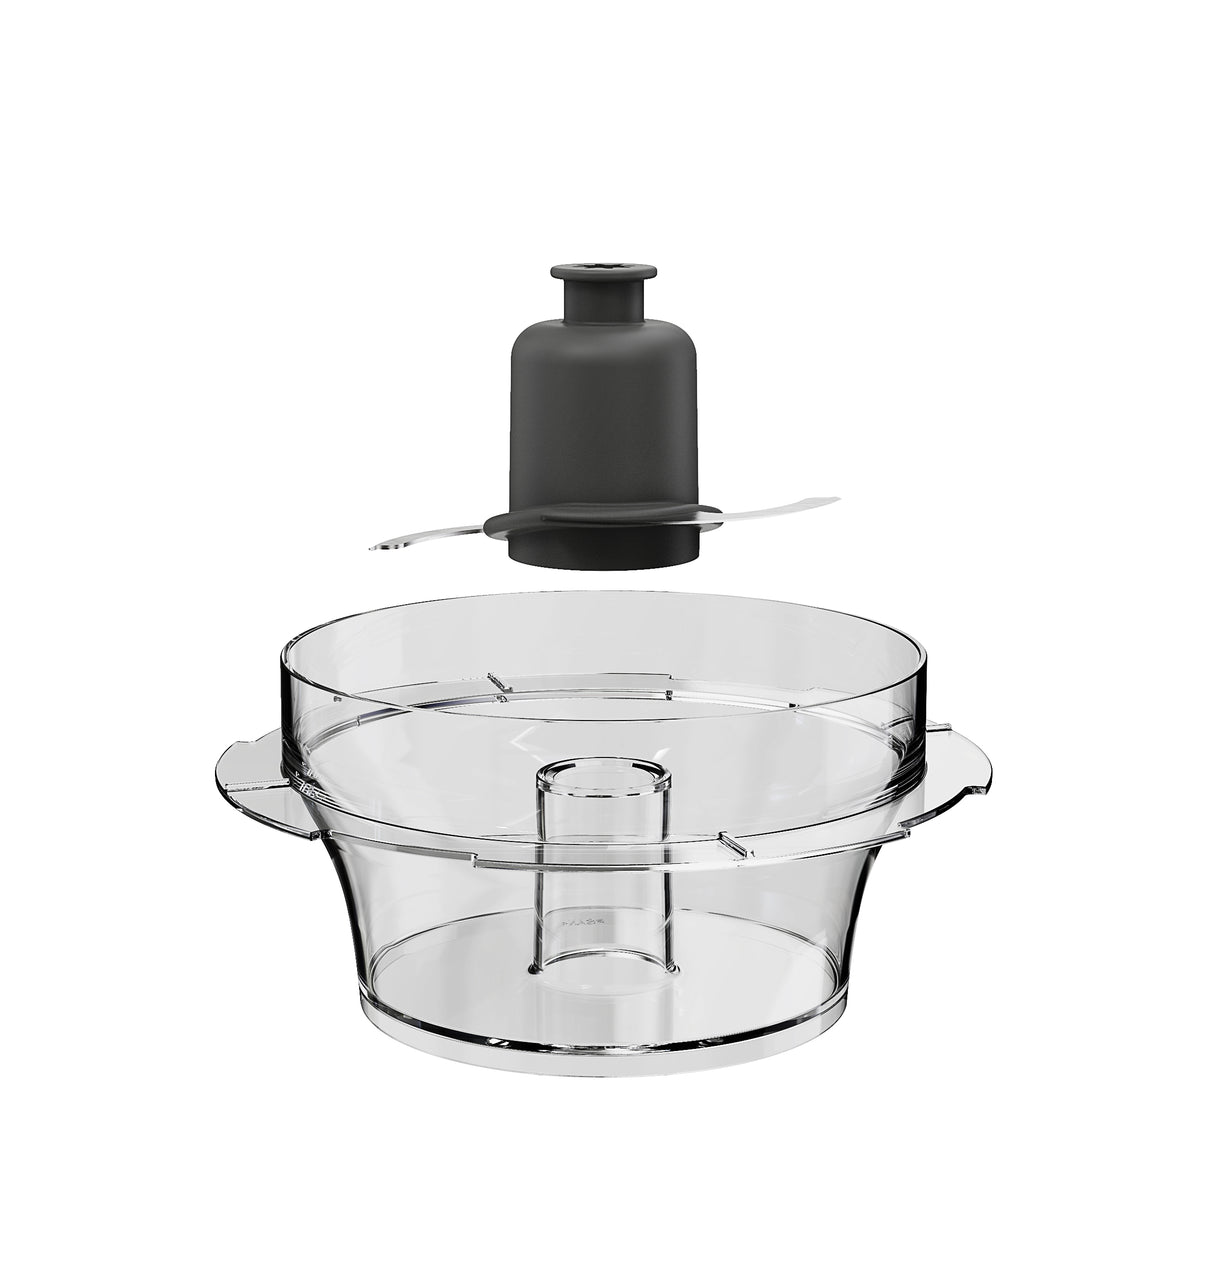 GE 12-Cup Food Processor with Accessories - (G8P1AASSPSS)